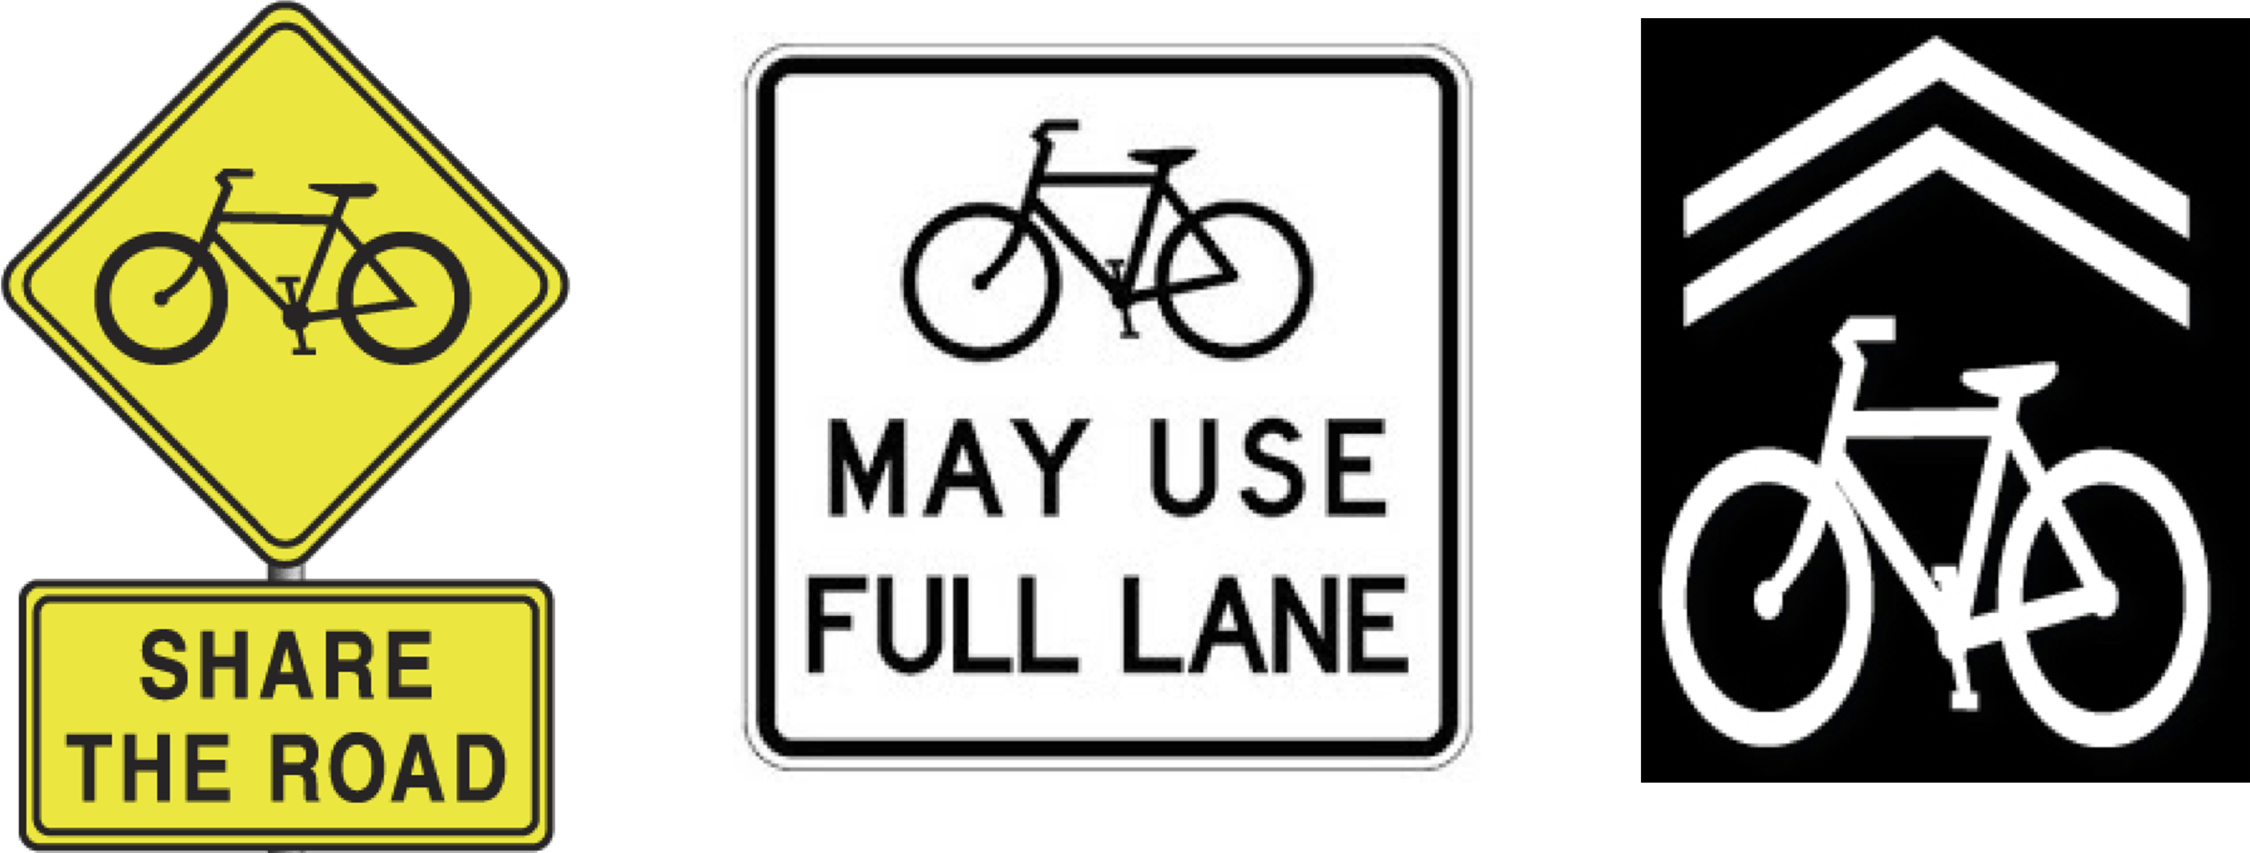 Bicycle signage. (Image credit: Hess and Peterson.)